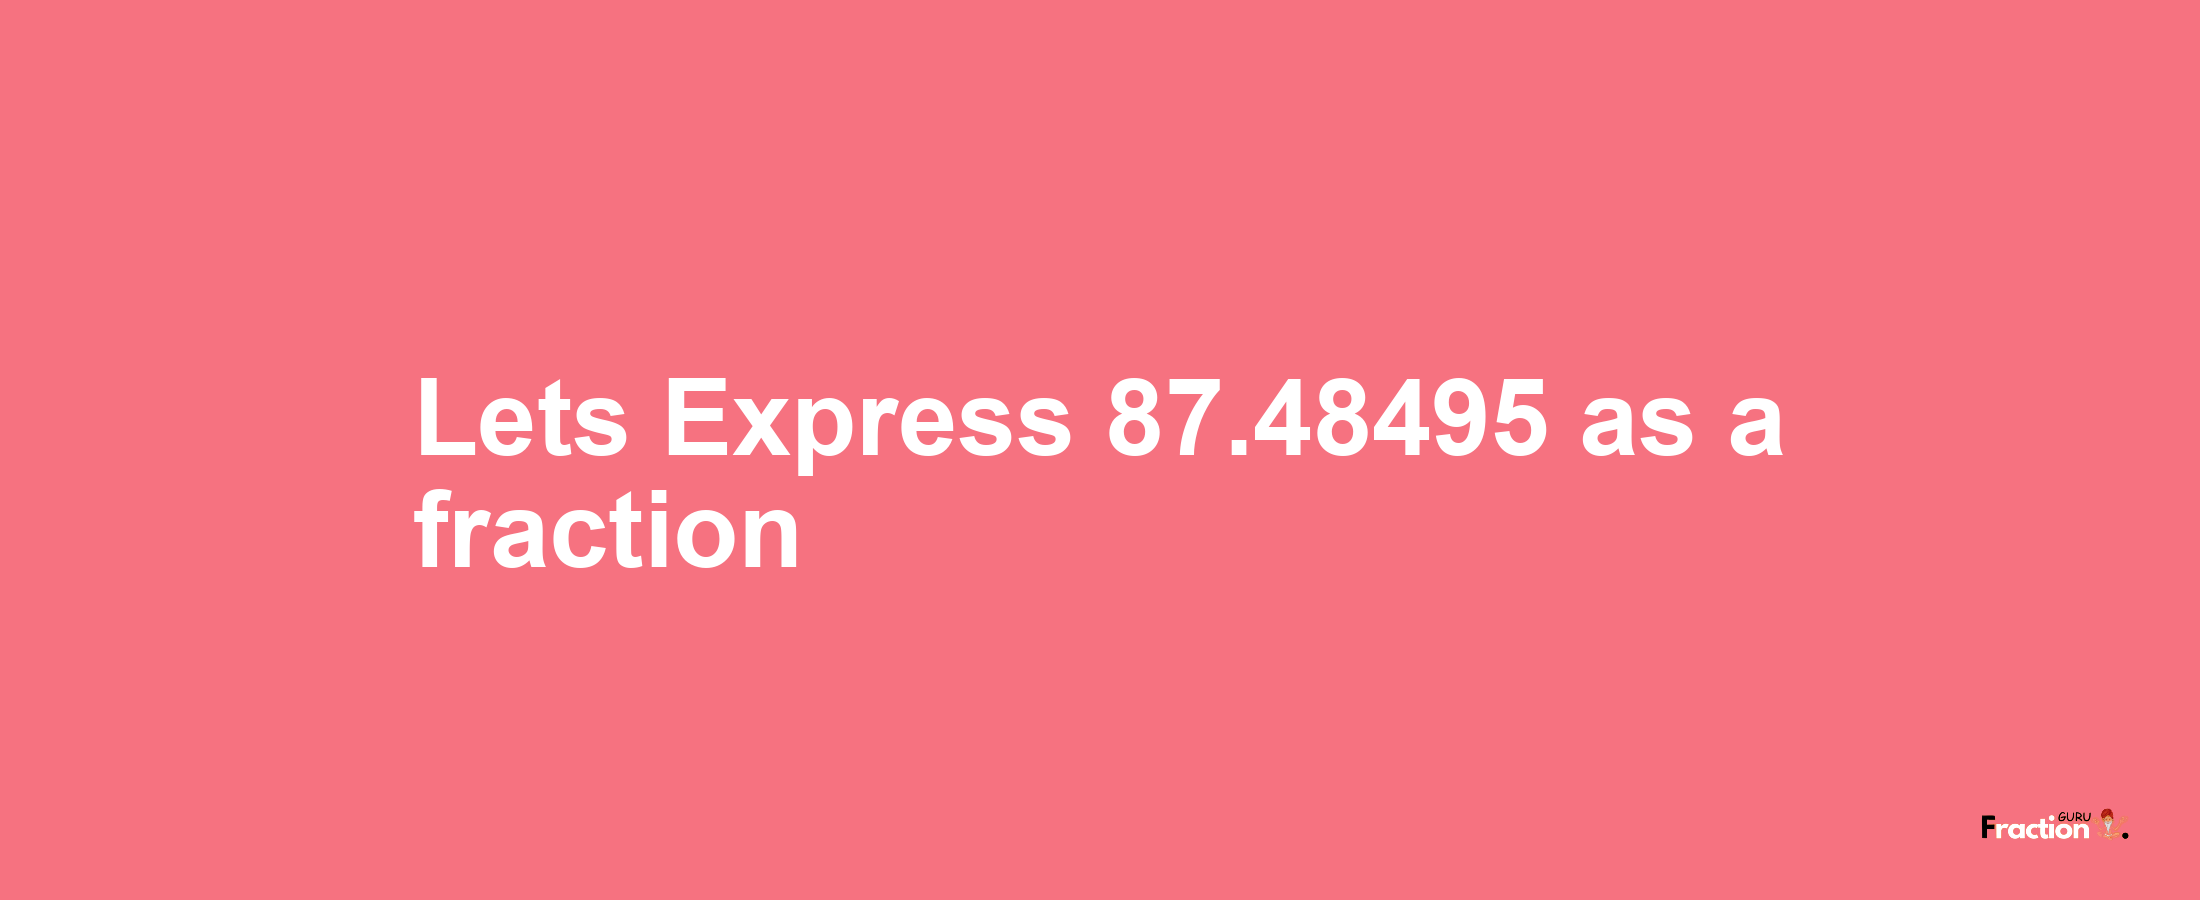 Lets Express 87.48495 as afraction